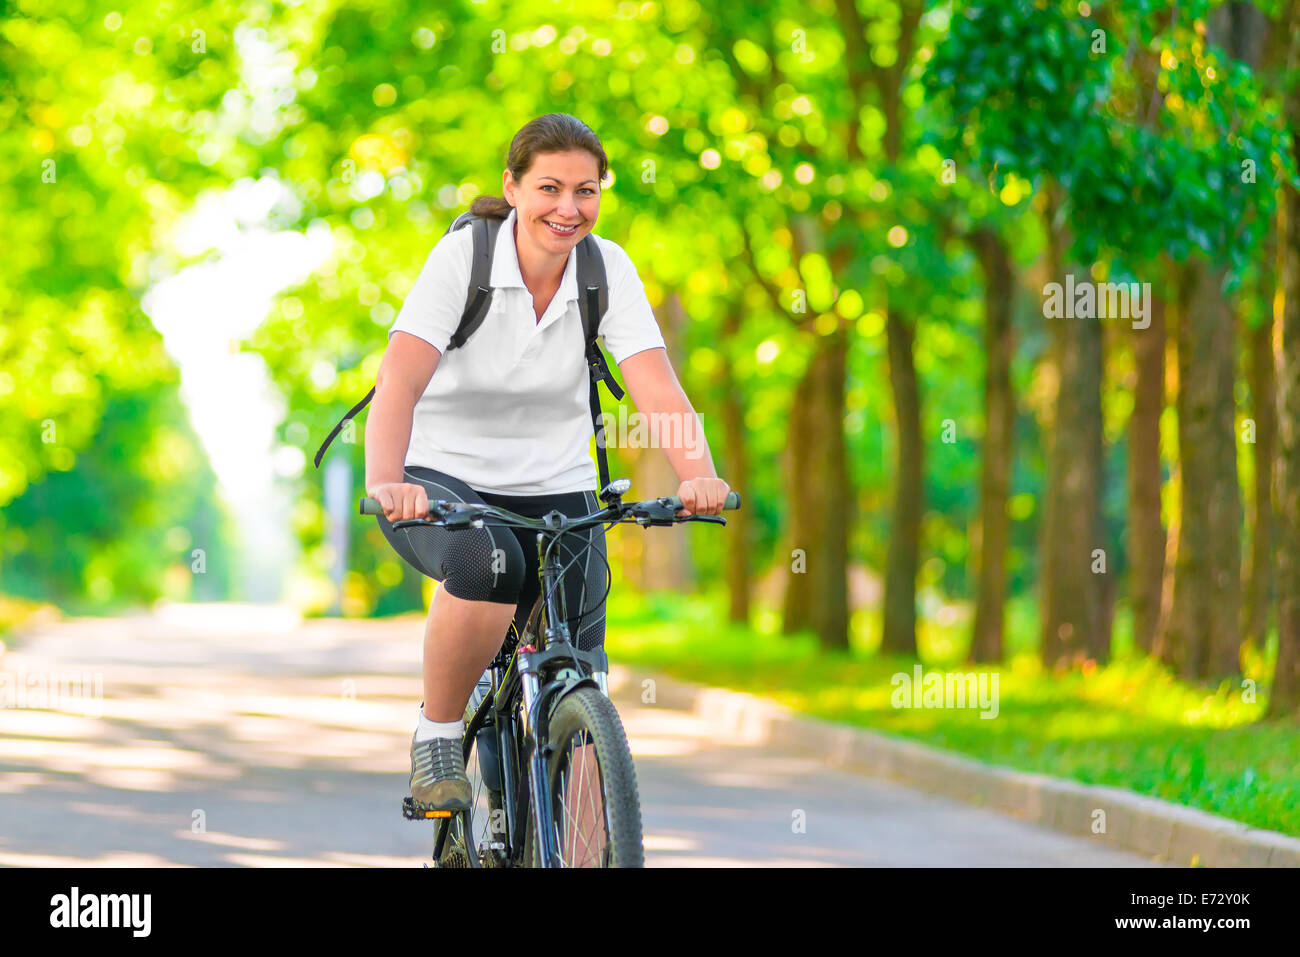 Joyful girl on a bicycle with a backpack Stock Photo